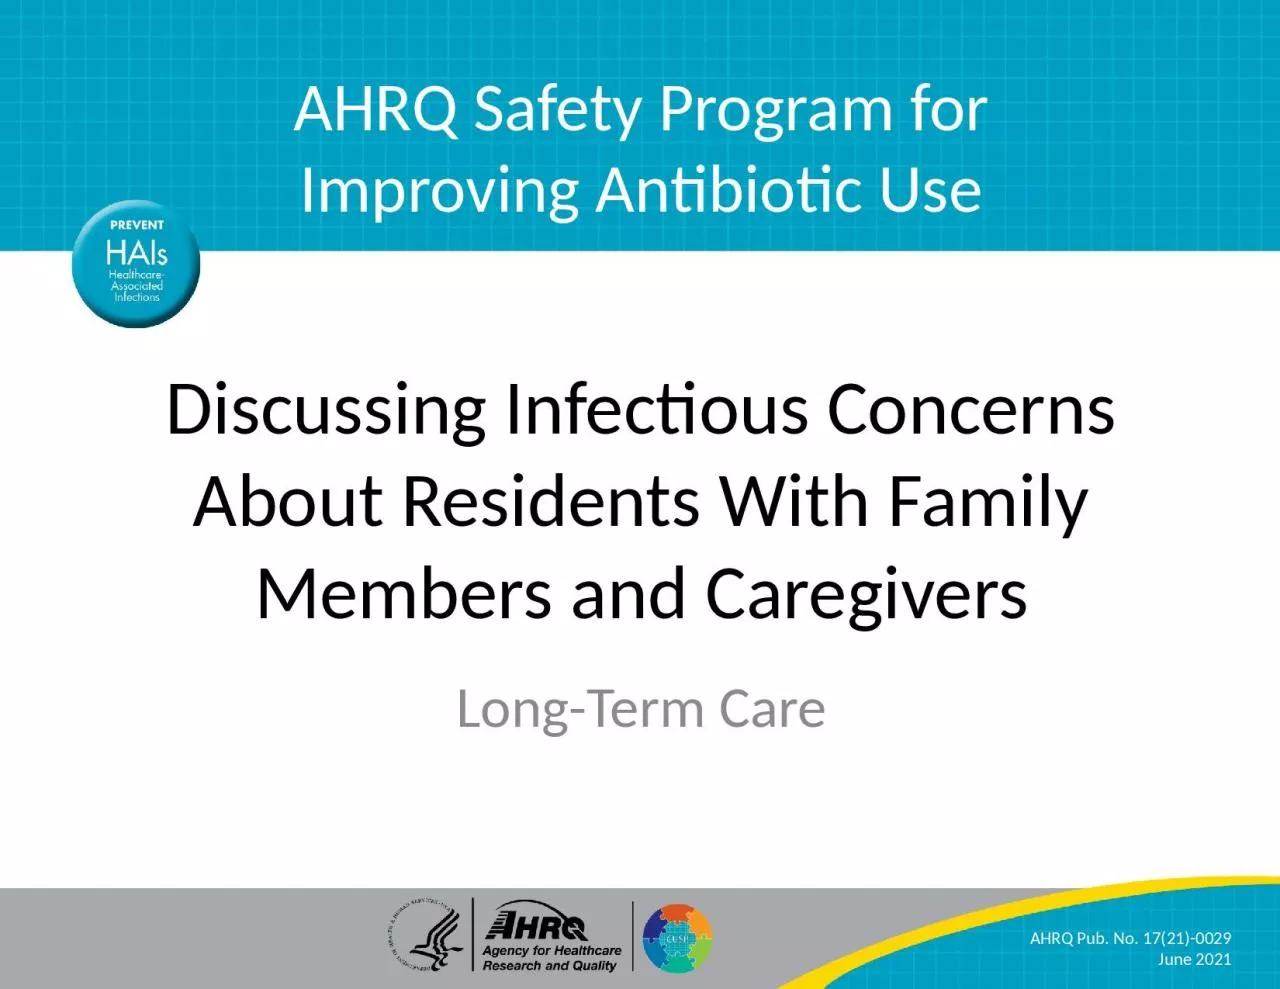 Discussing Infectious Concerns About Residents With Family Members and Caregivers